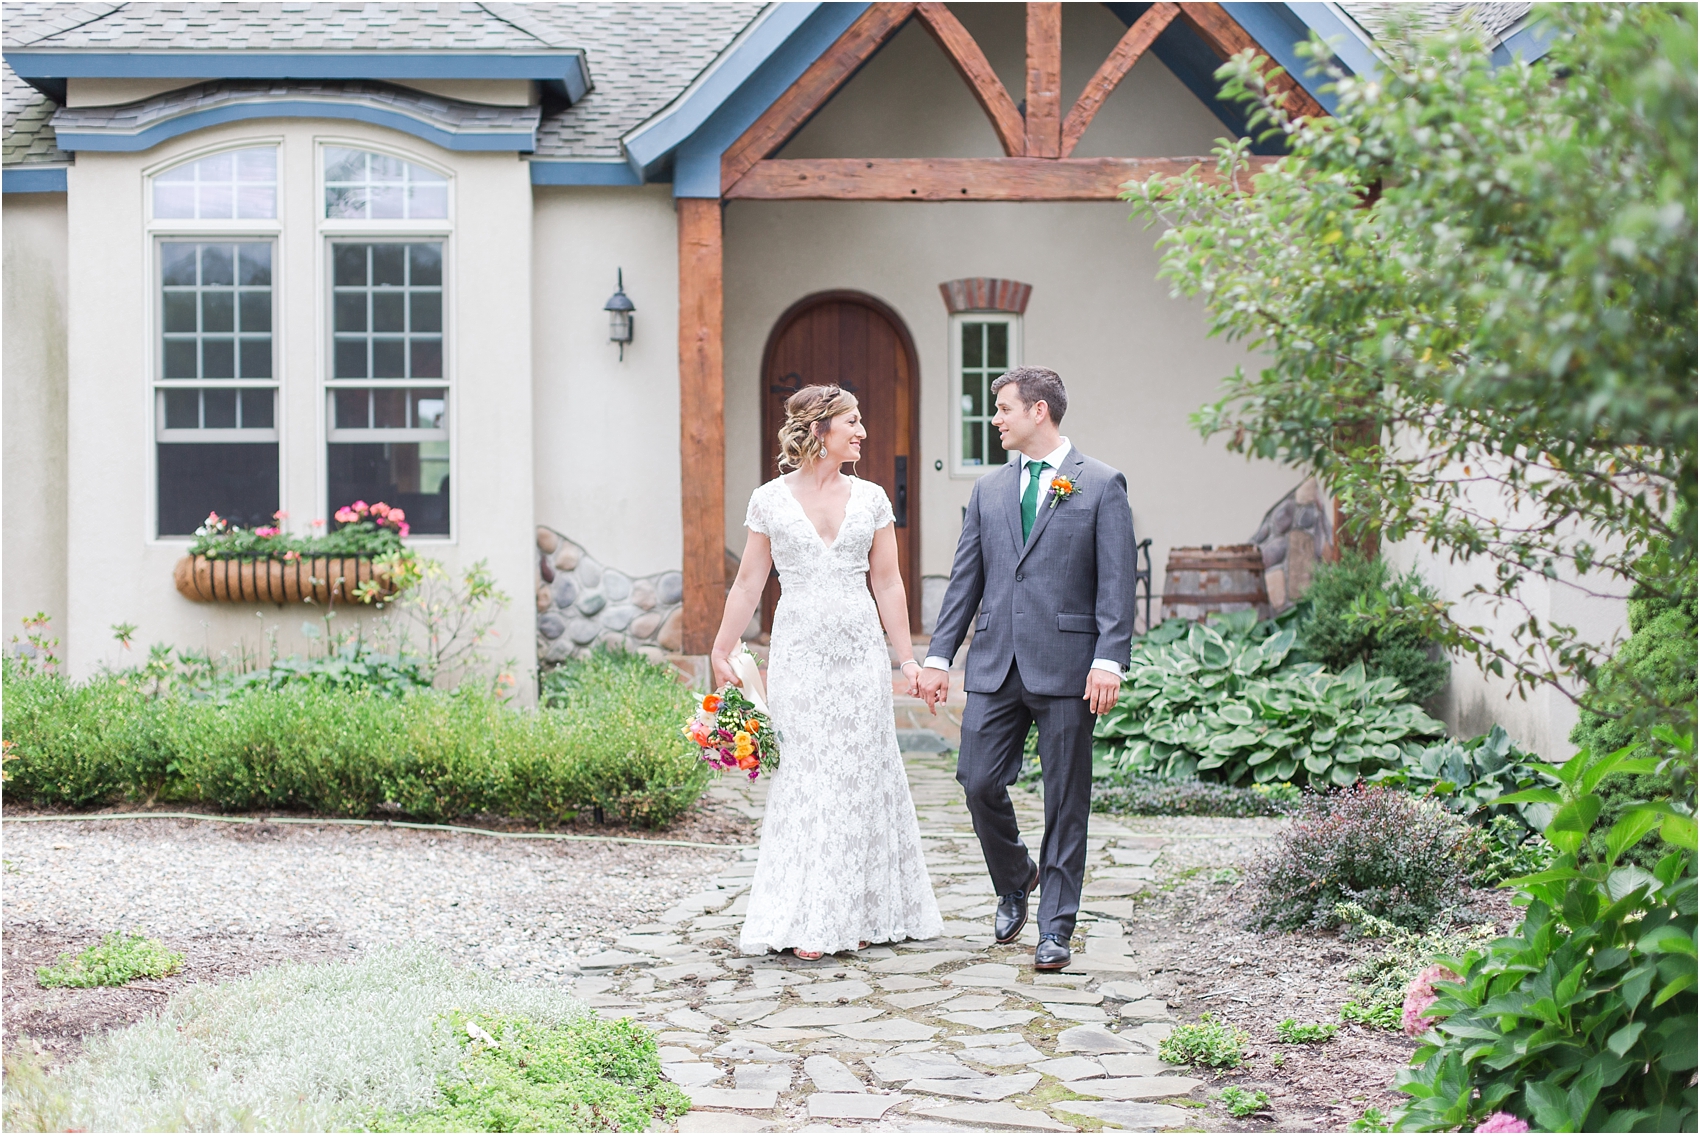 romantic-intimate-backyard-wedding-photos-at-private-estate-in-ann-arbor-mi-by-courtney-carolyn-photography_0071.jpg